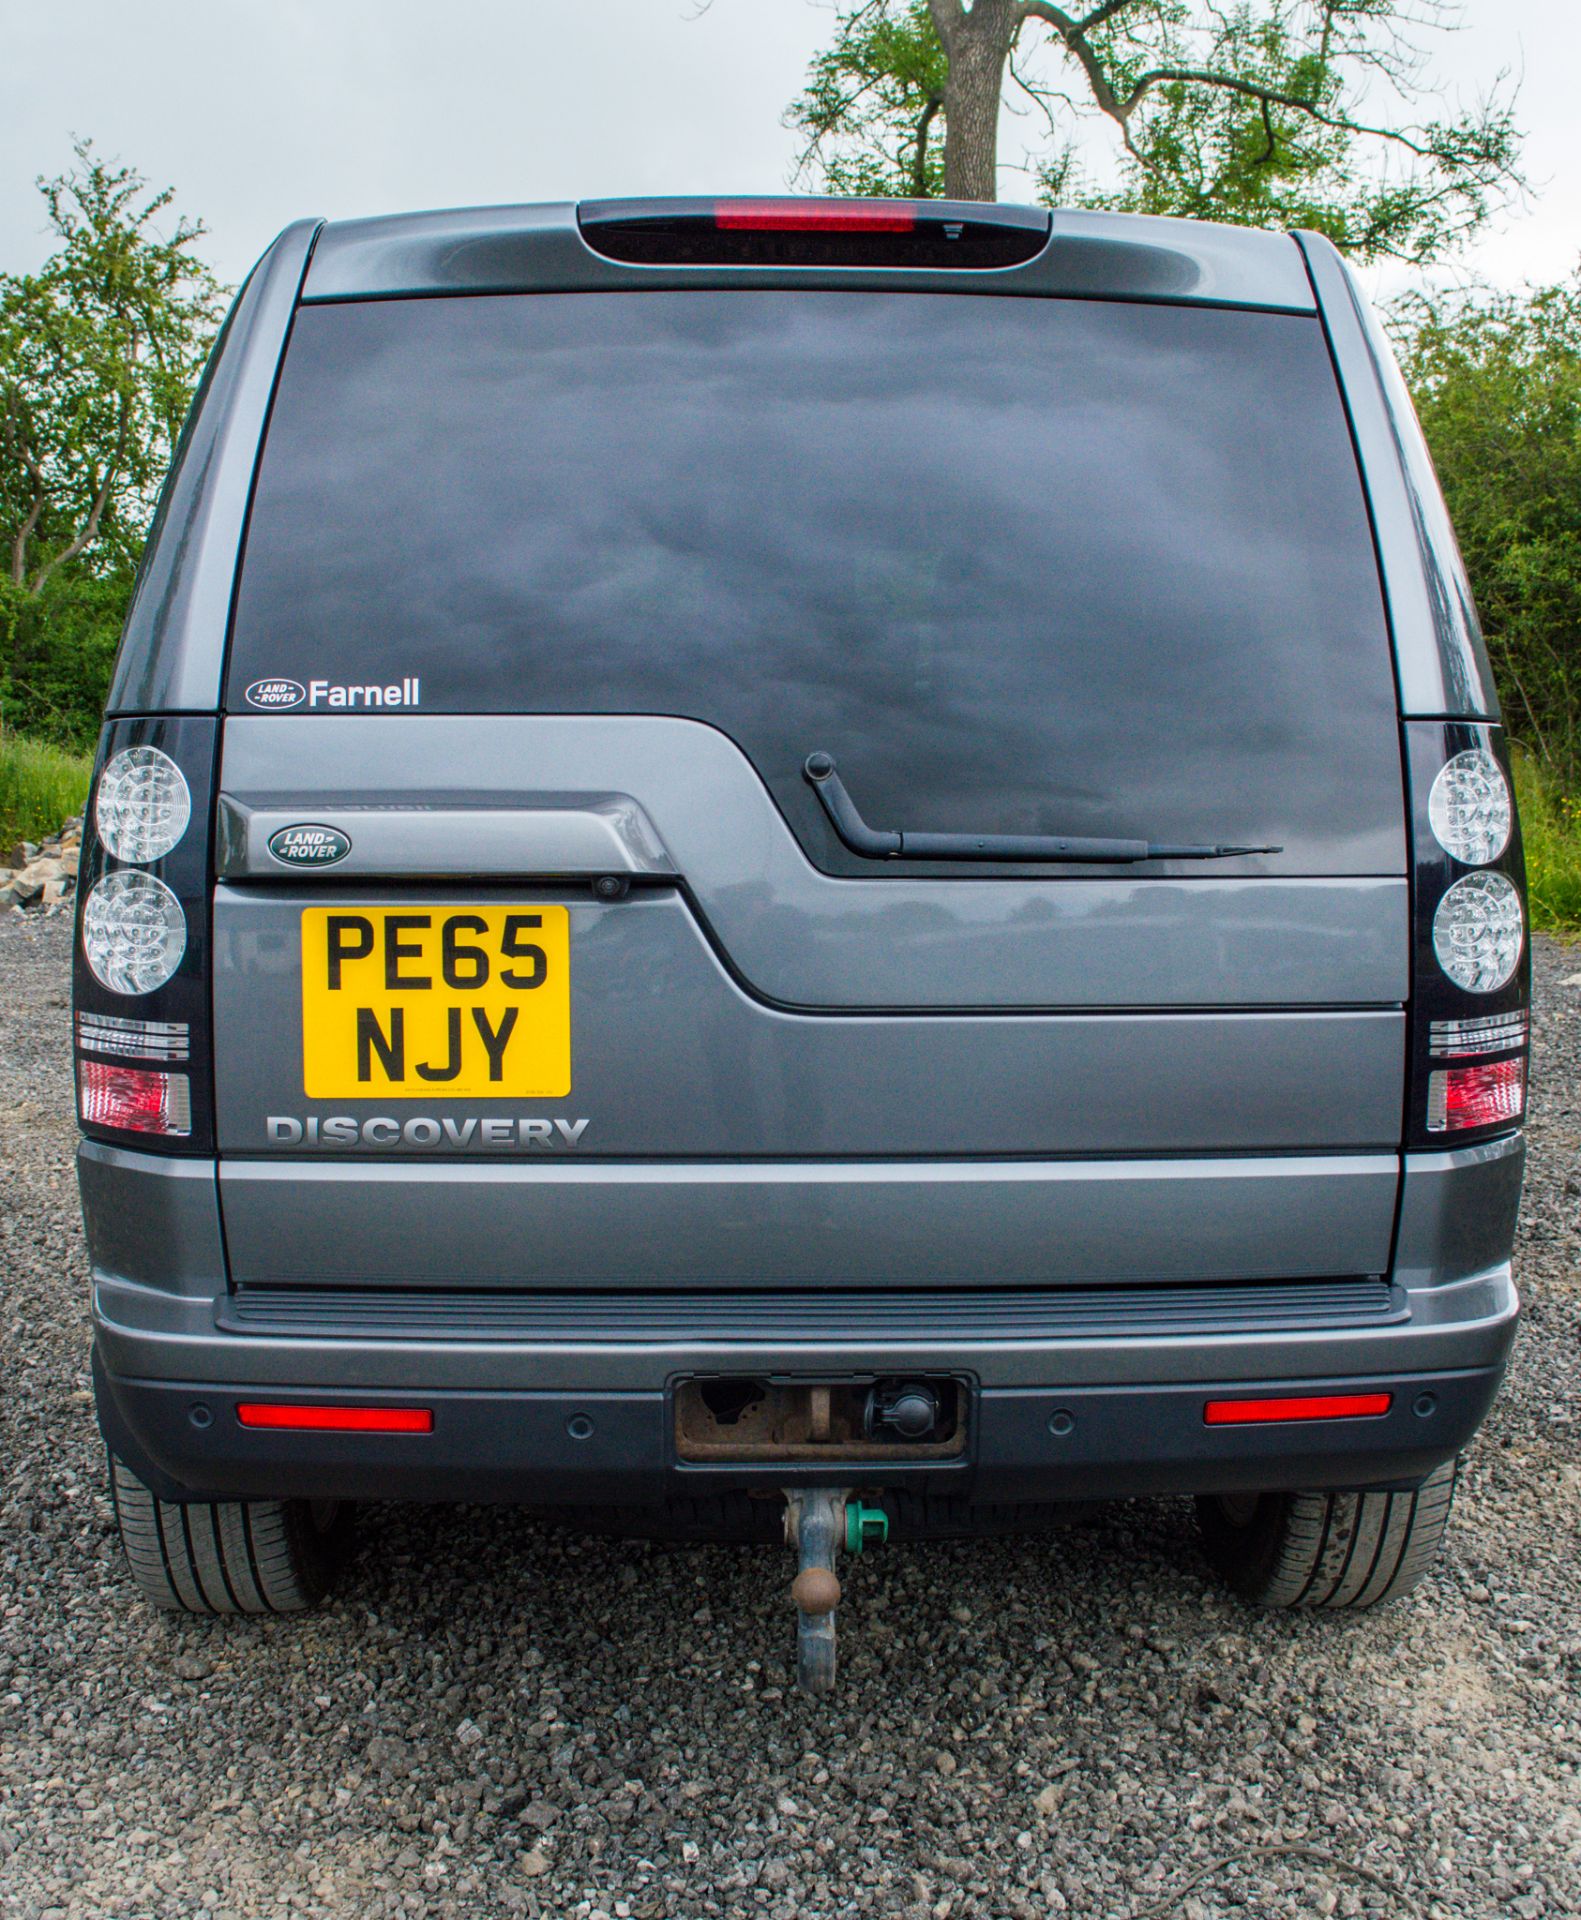 Land Rover Discovery 4 SE 3.0 TDV6 Commercial 4 wheel drive utility vehicle  Reg No: PE 65 NJY  Date - Image 6 of 23